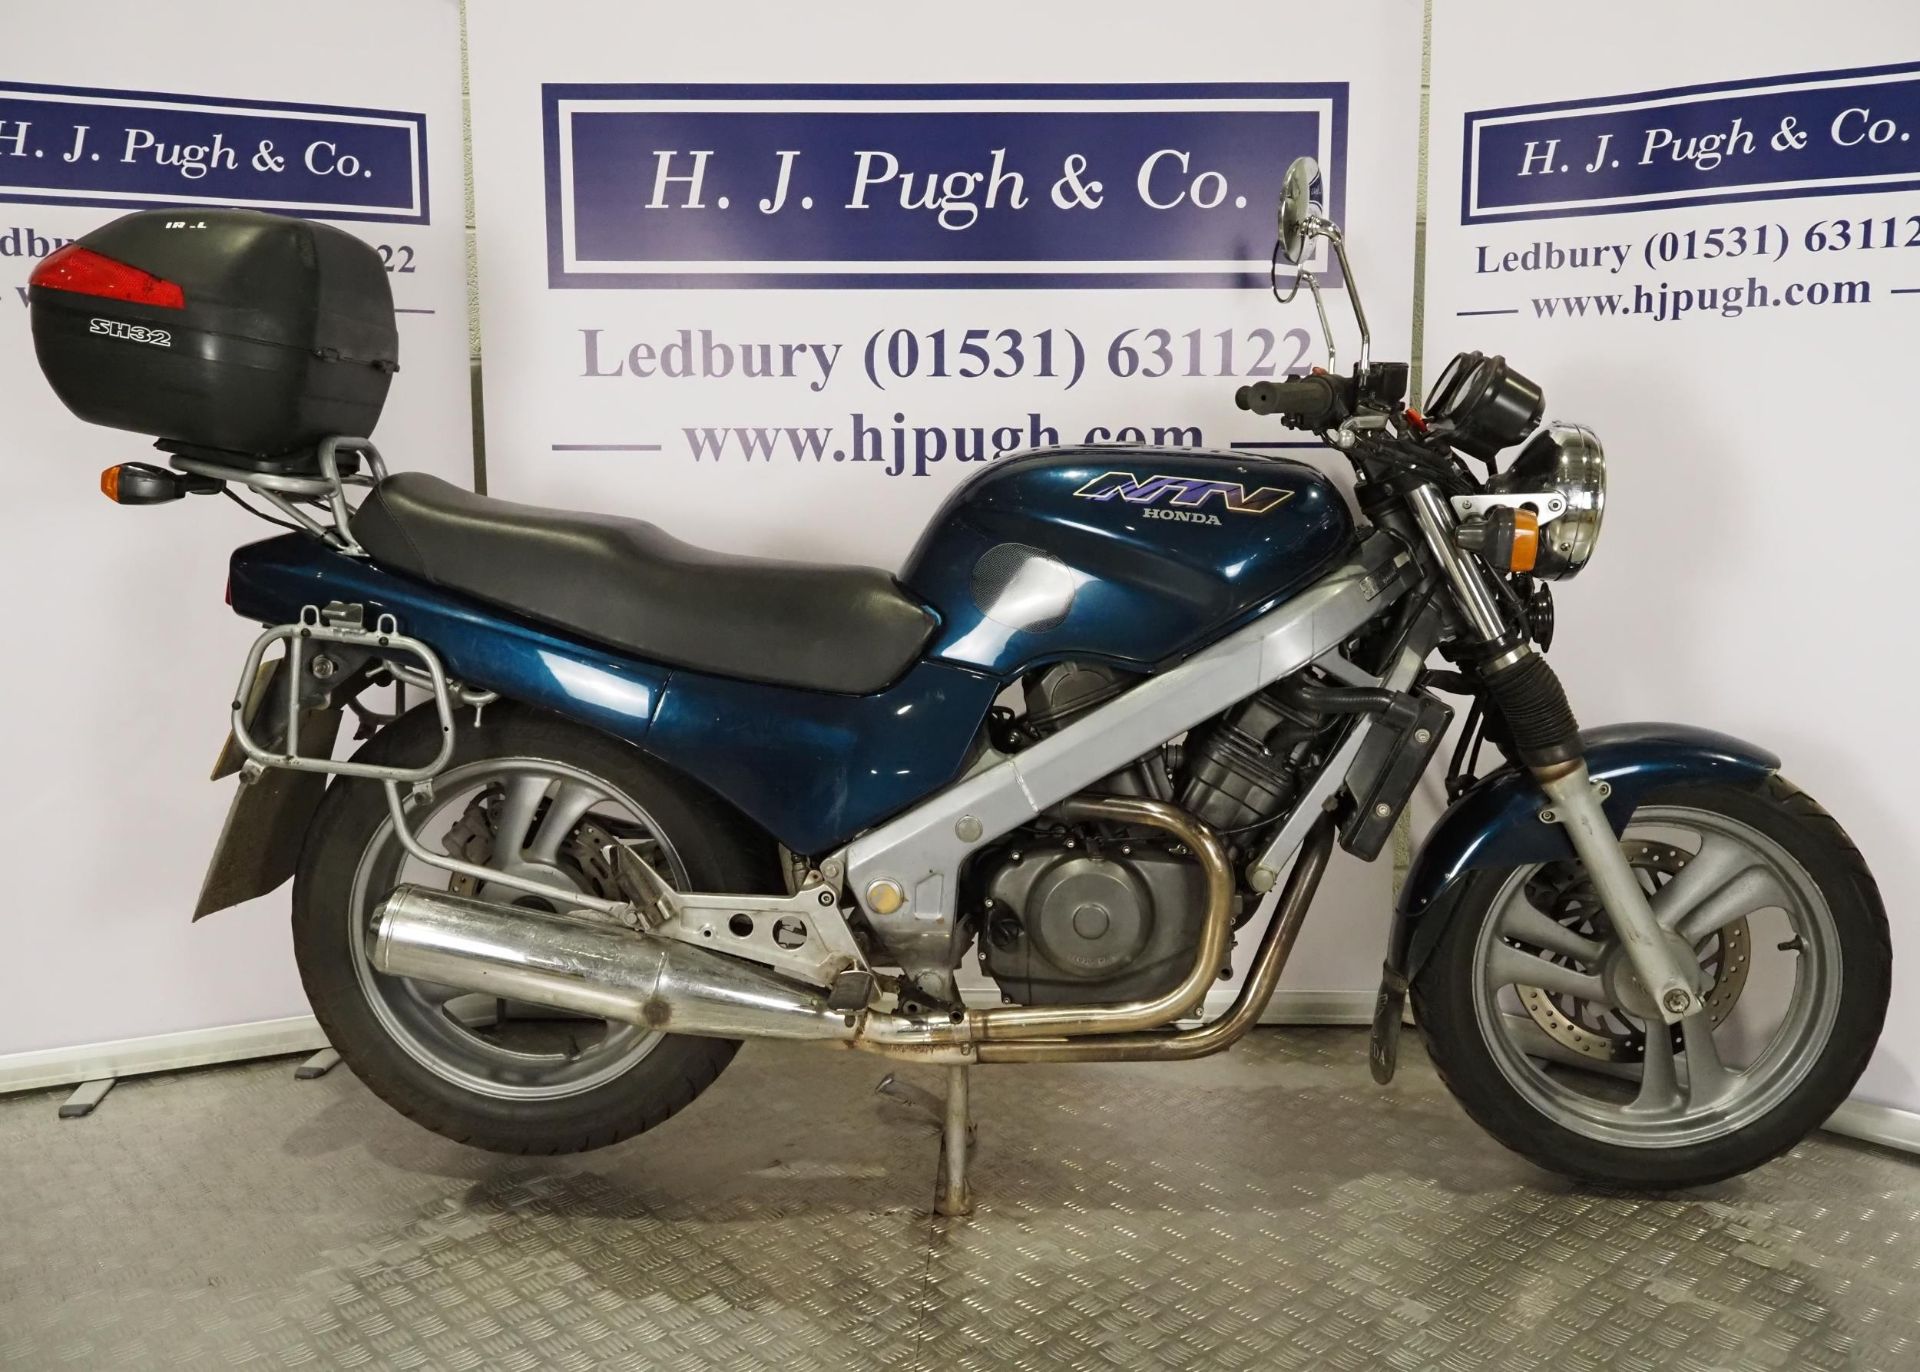 Honda NTV650 motorcycle. 1995. 647cc. Runs and rides. Not used for some time so will need - Image 2 of 7